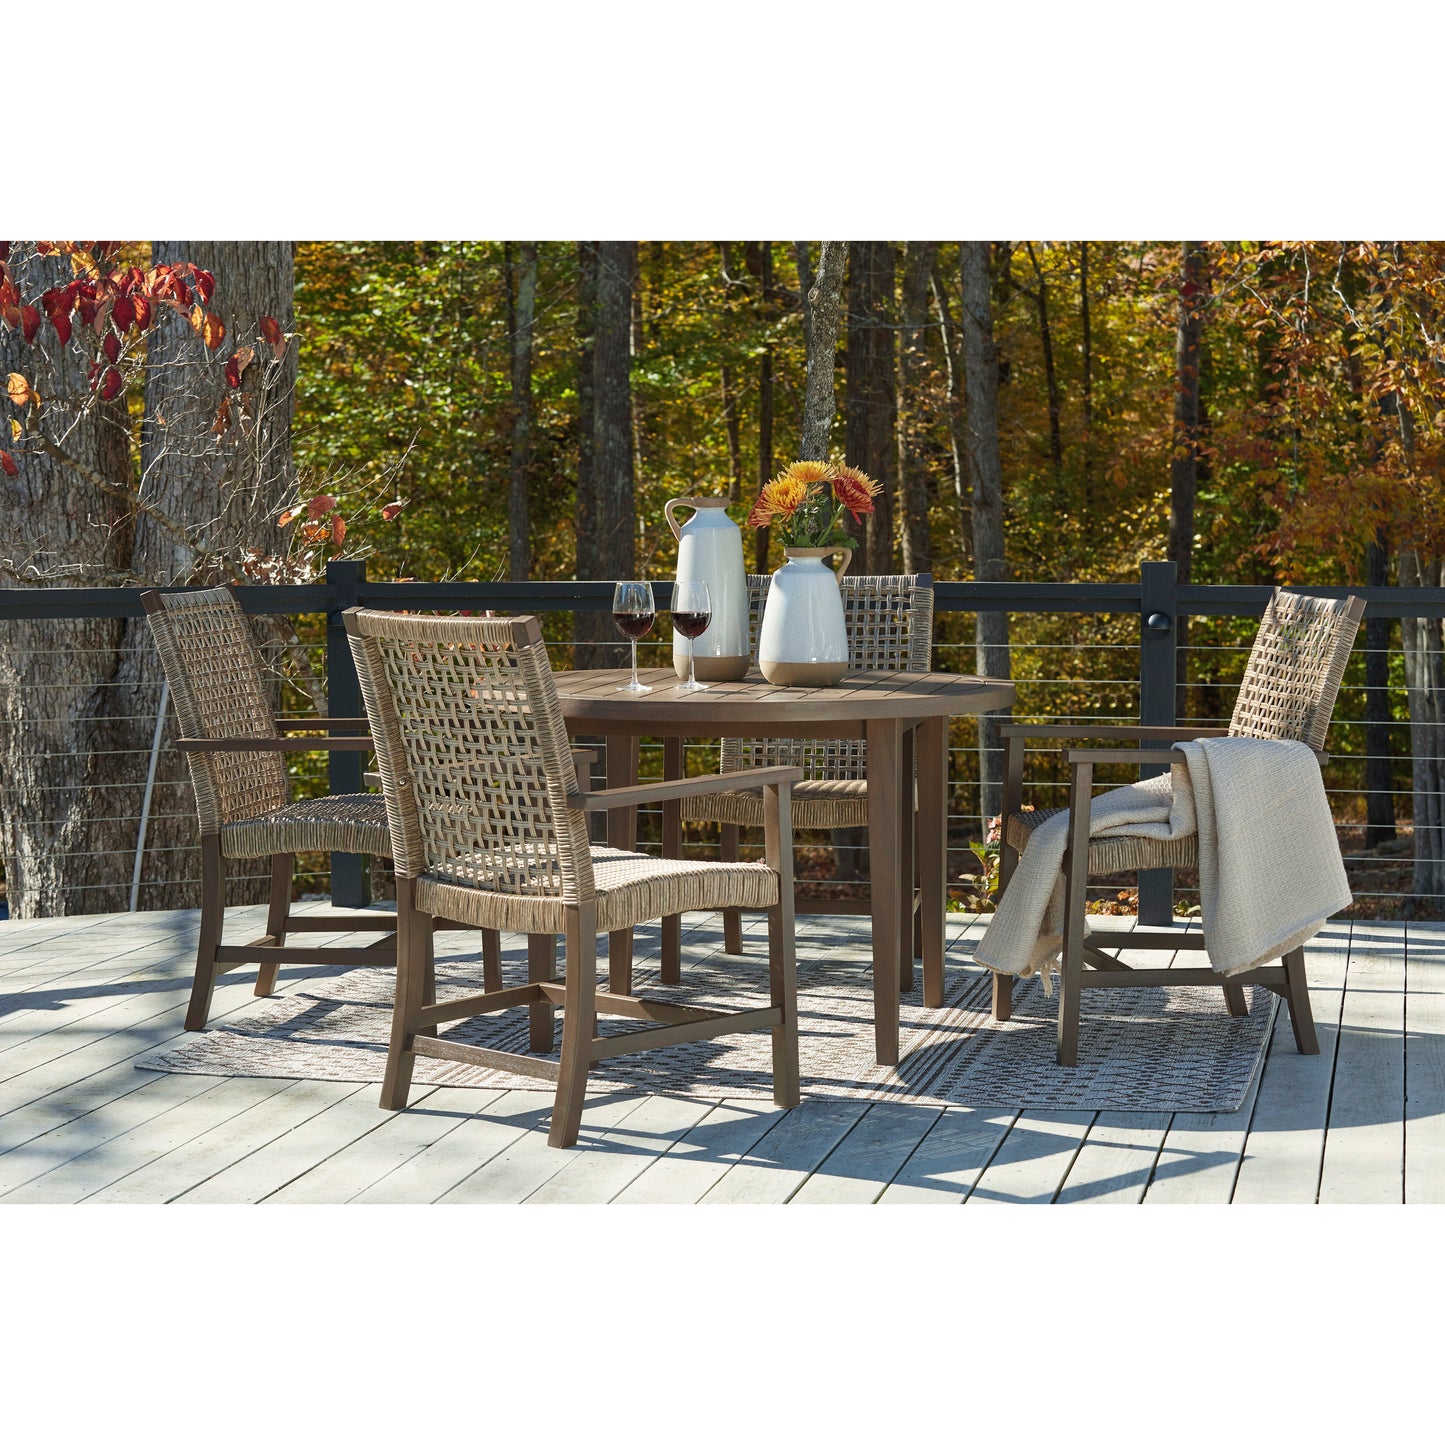 GERMALIA OUTDOOR DINING TABLE & 4 CHAIRS